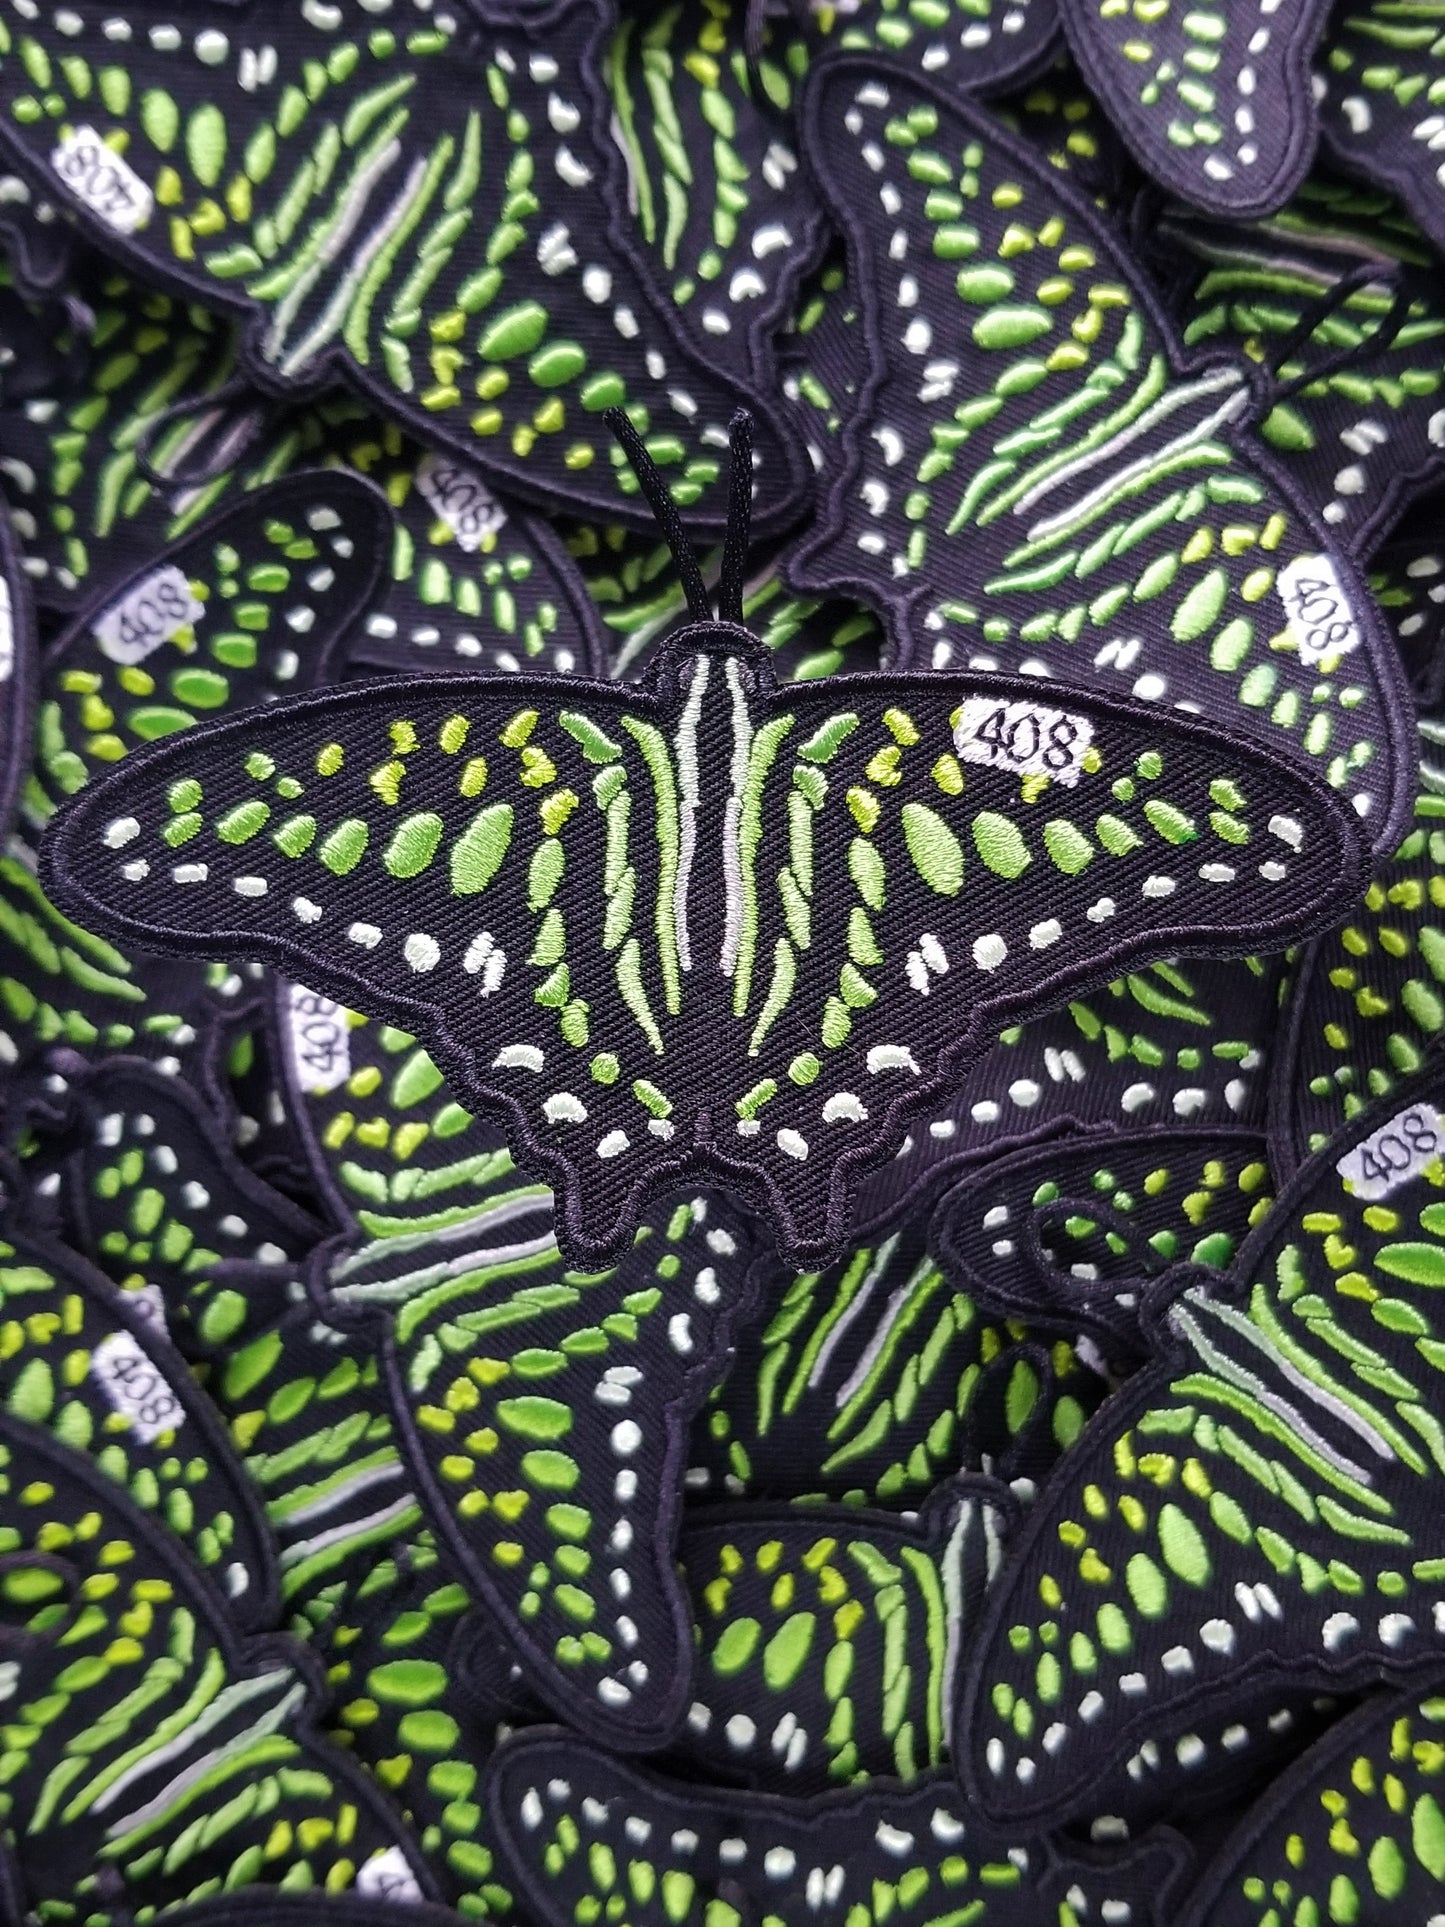 SCP-408 Illusionary Butterfly Patch